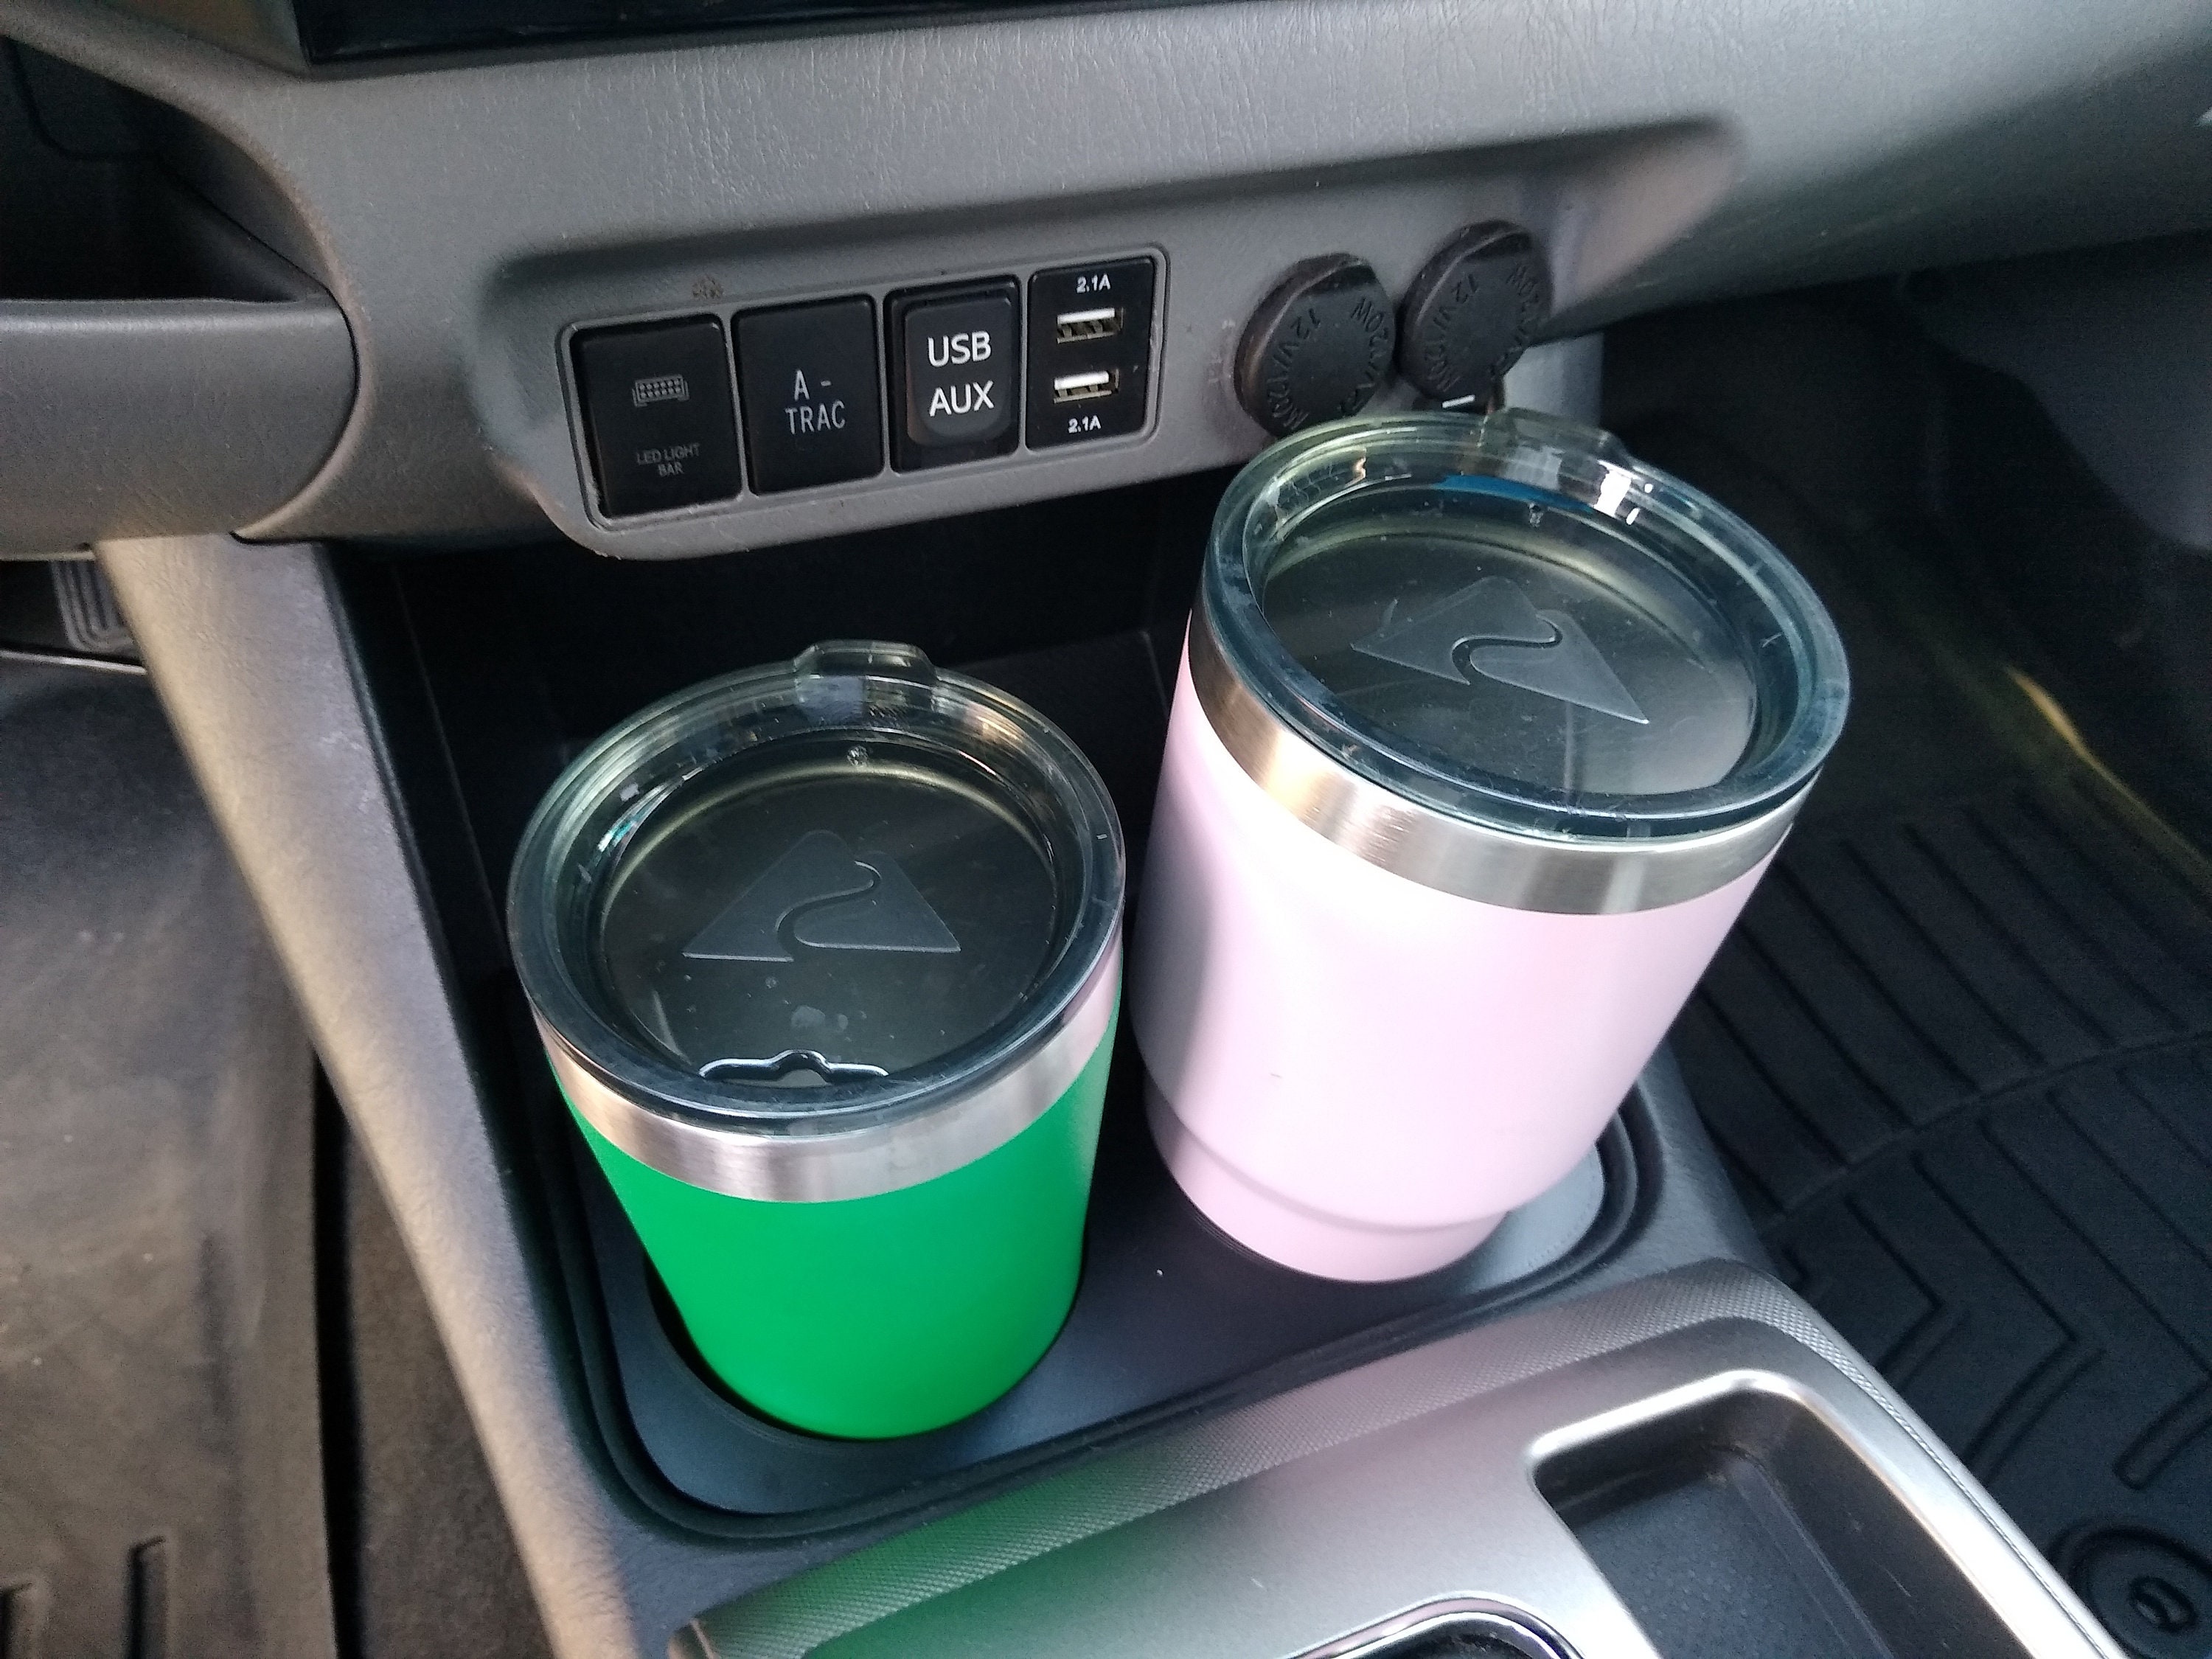 2017 Chevrolet Impala CupCoffee – YETI ® cup holder for your car